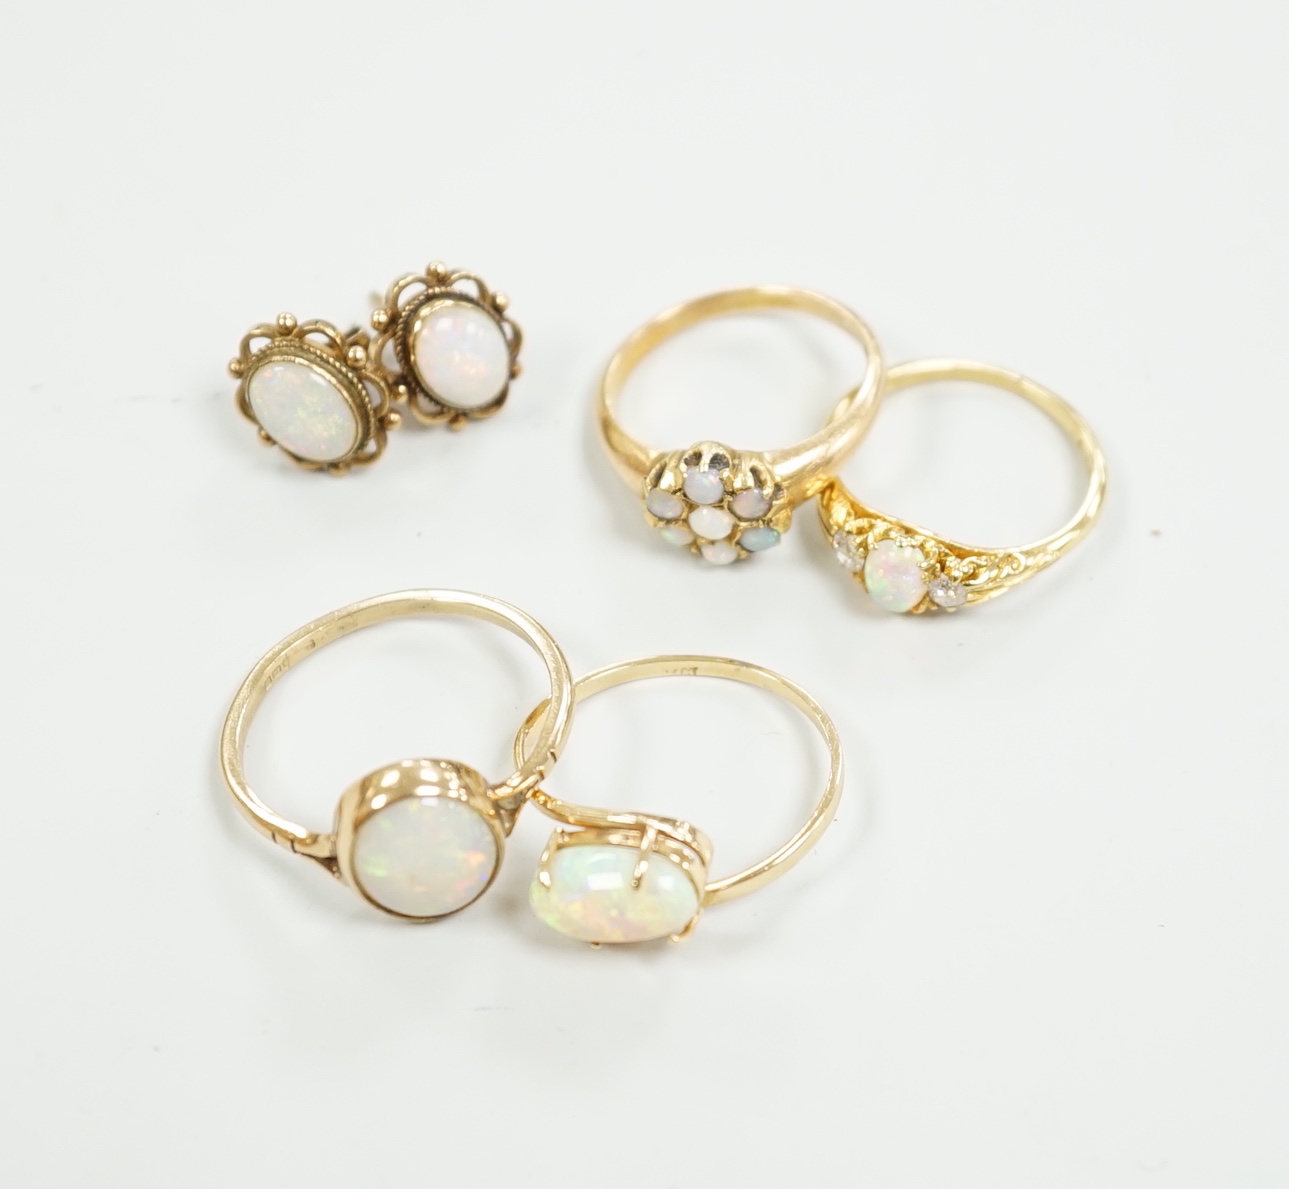 Two 18ct and white opal set rings, one with diamonds, gross 6.2 grams, a 14ct and white opal ring, a 9ct gold and white opal ring and a pair of 9ct gold and white opal earrings.